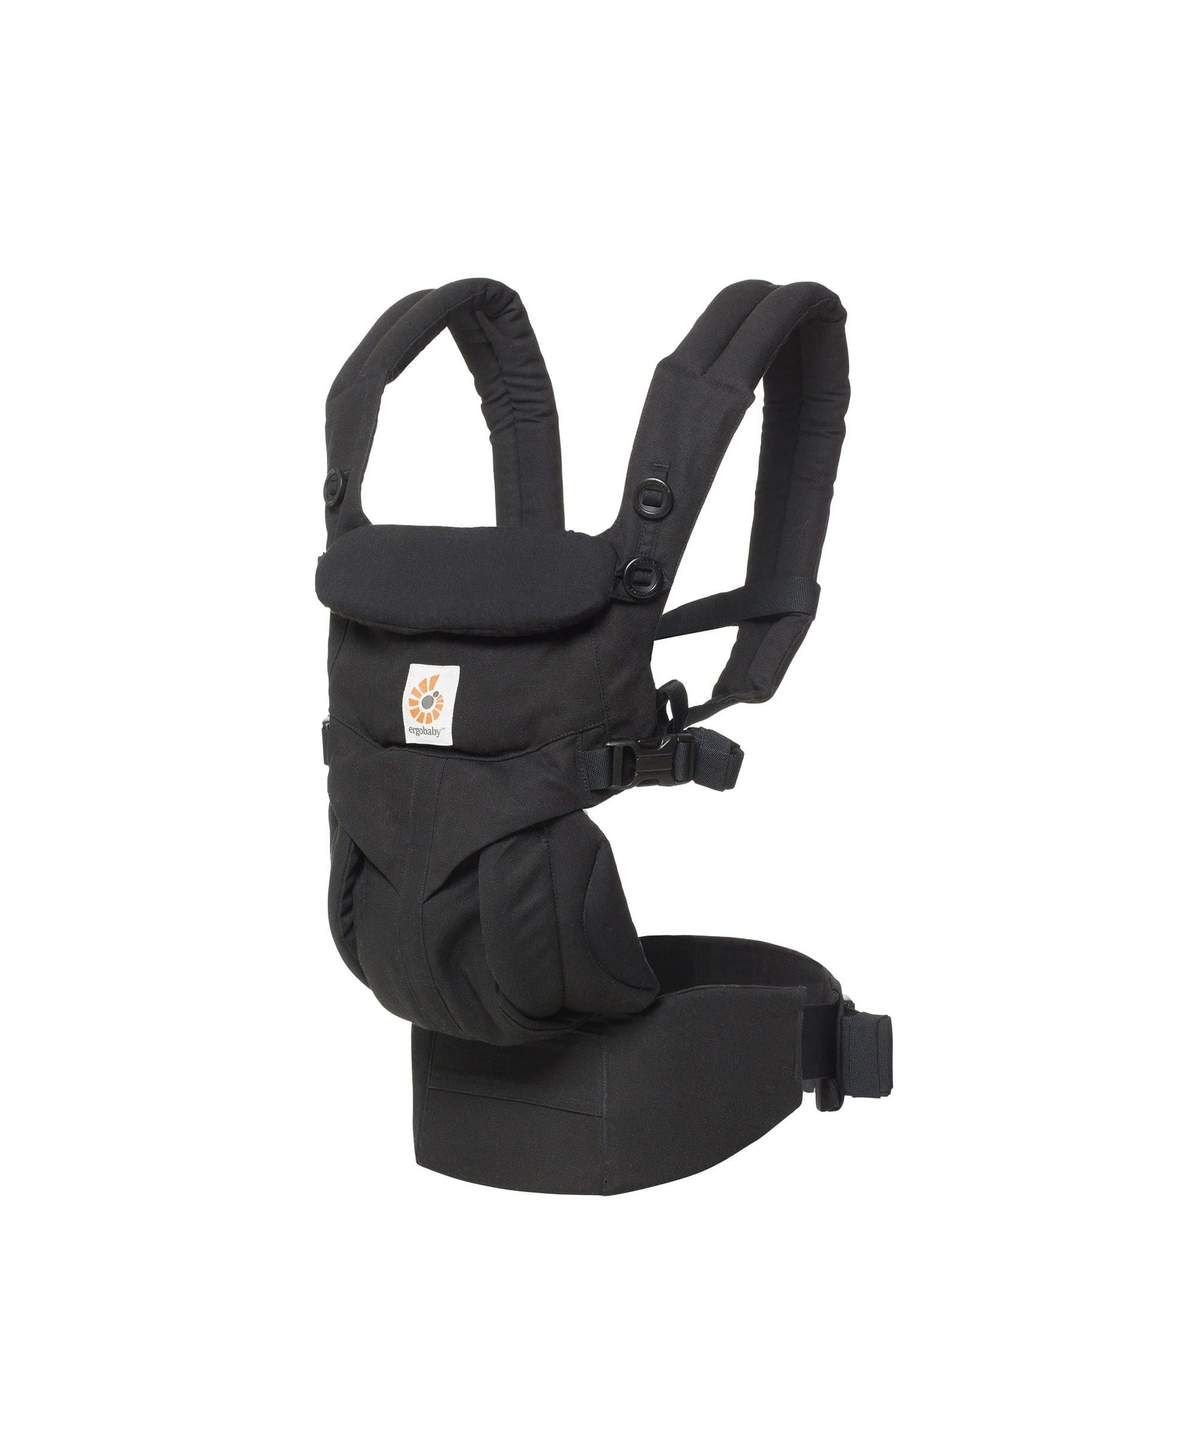 black friday baby carrier sale